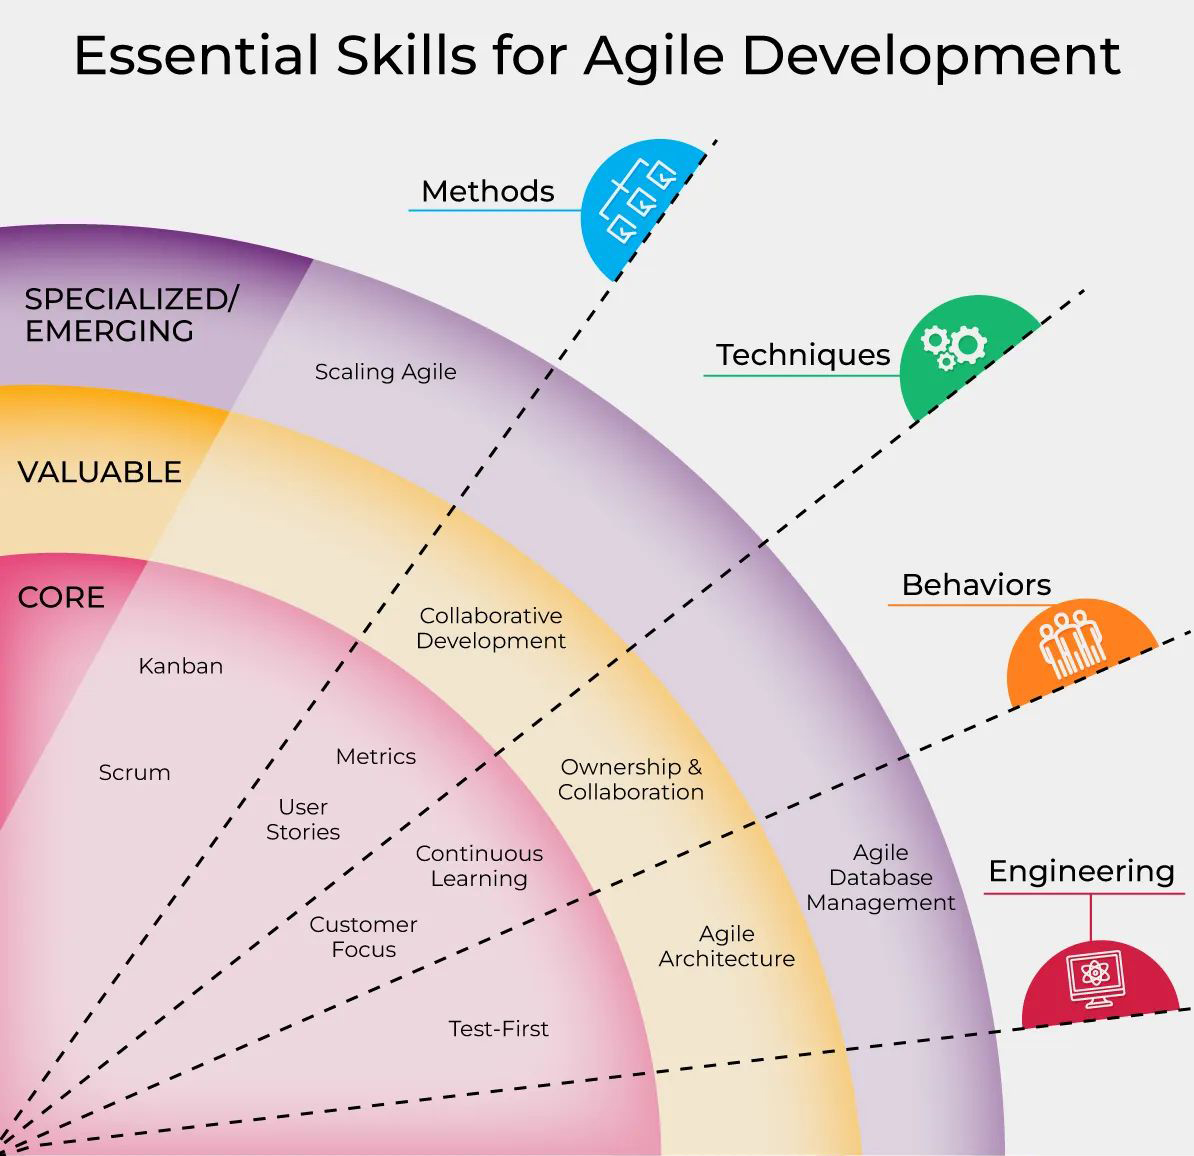 Tech leaders must understand the critical skill sets required for agile software development to ensure their organizations remain at the forefront of innovation and maintain competitive advantage in the software-driven economy.
#AgileLeadership #SoftwareDevelopment #Innovation